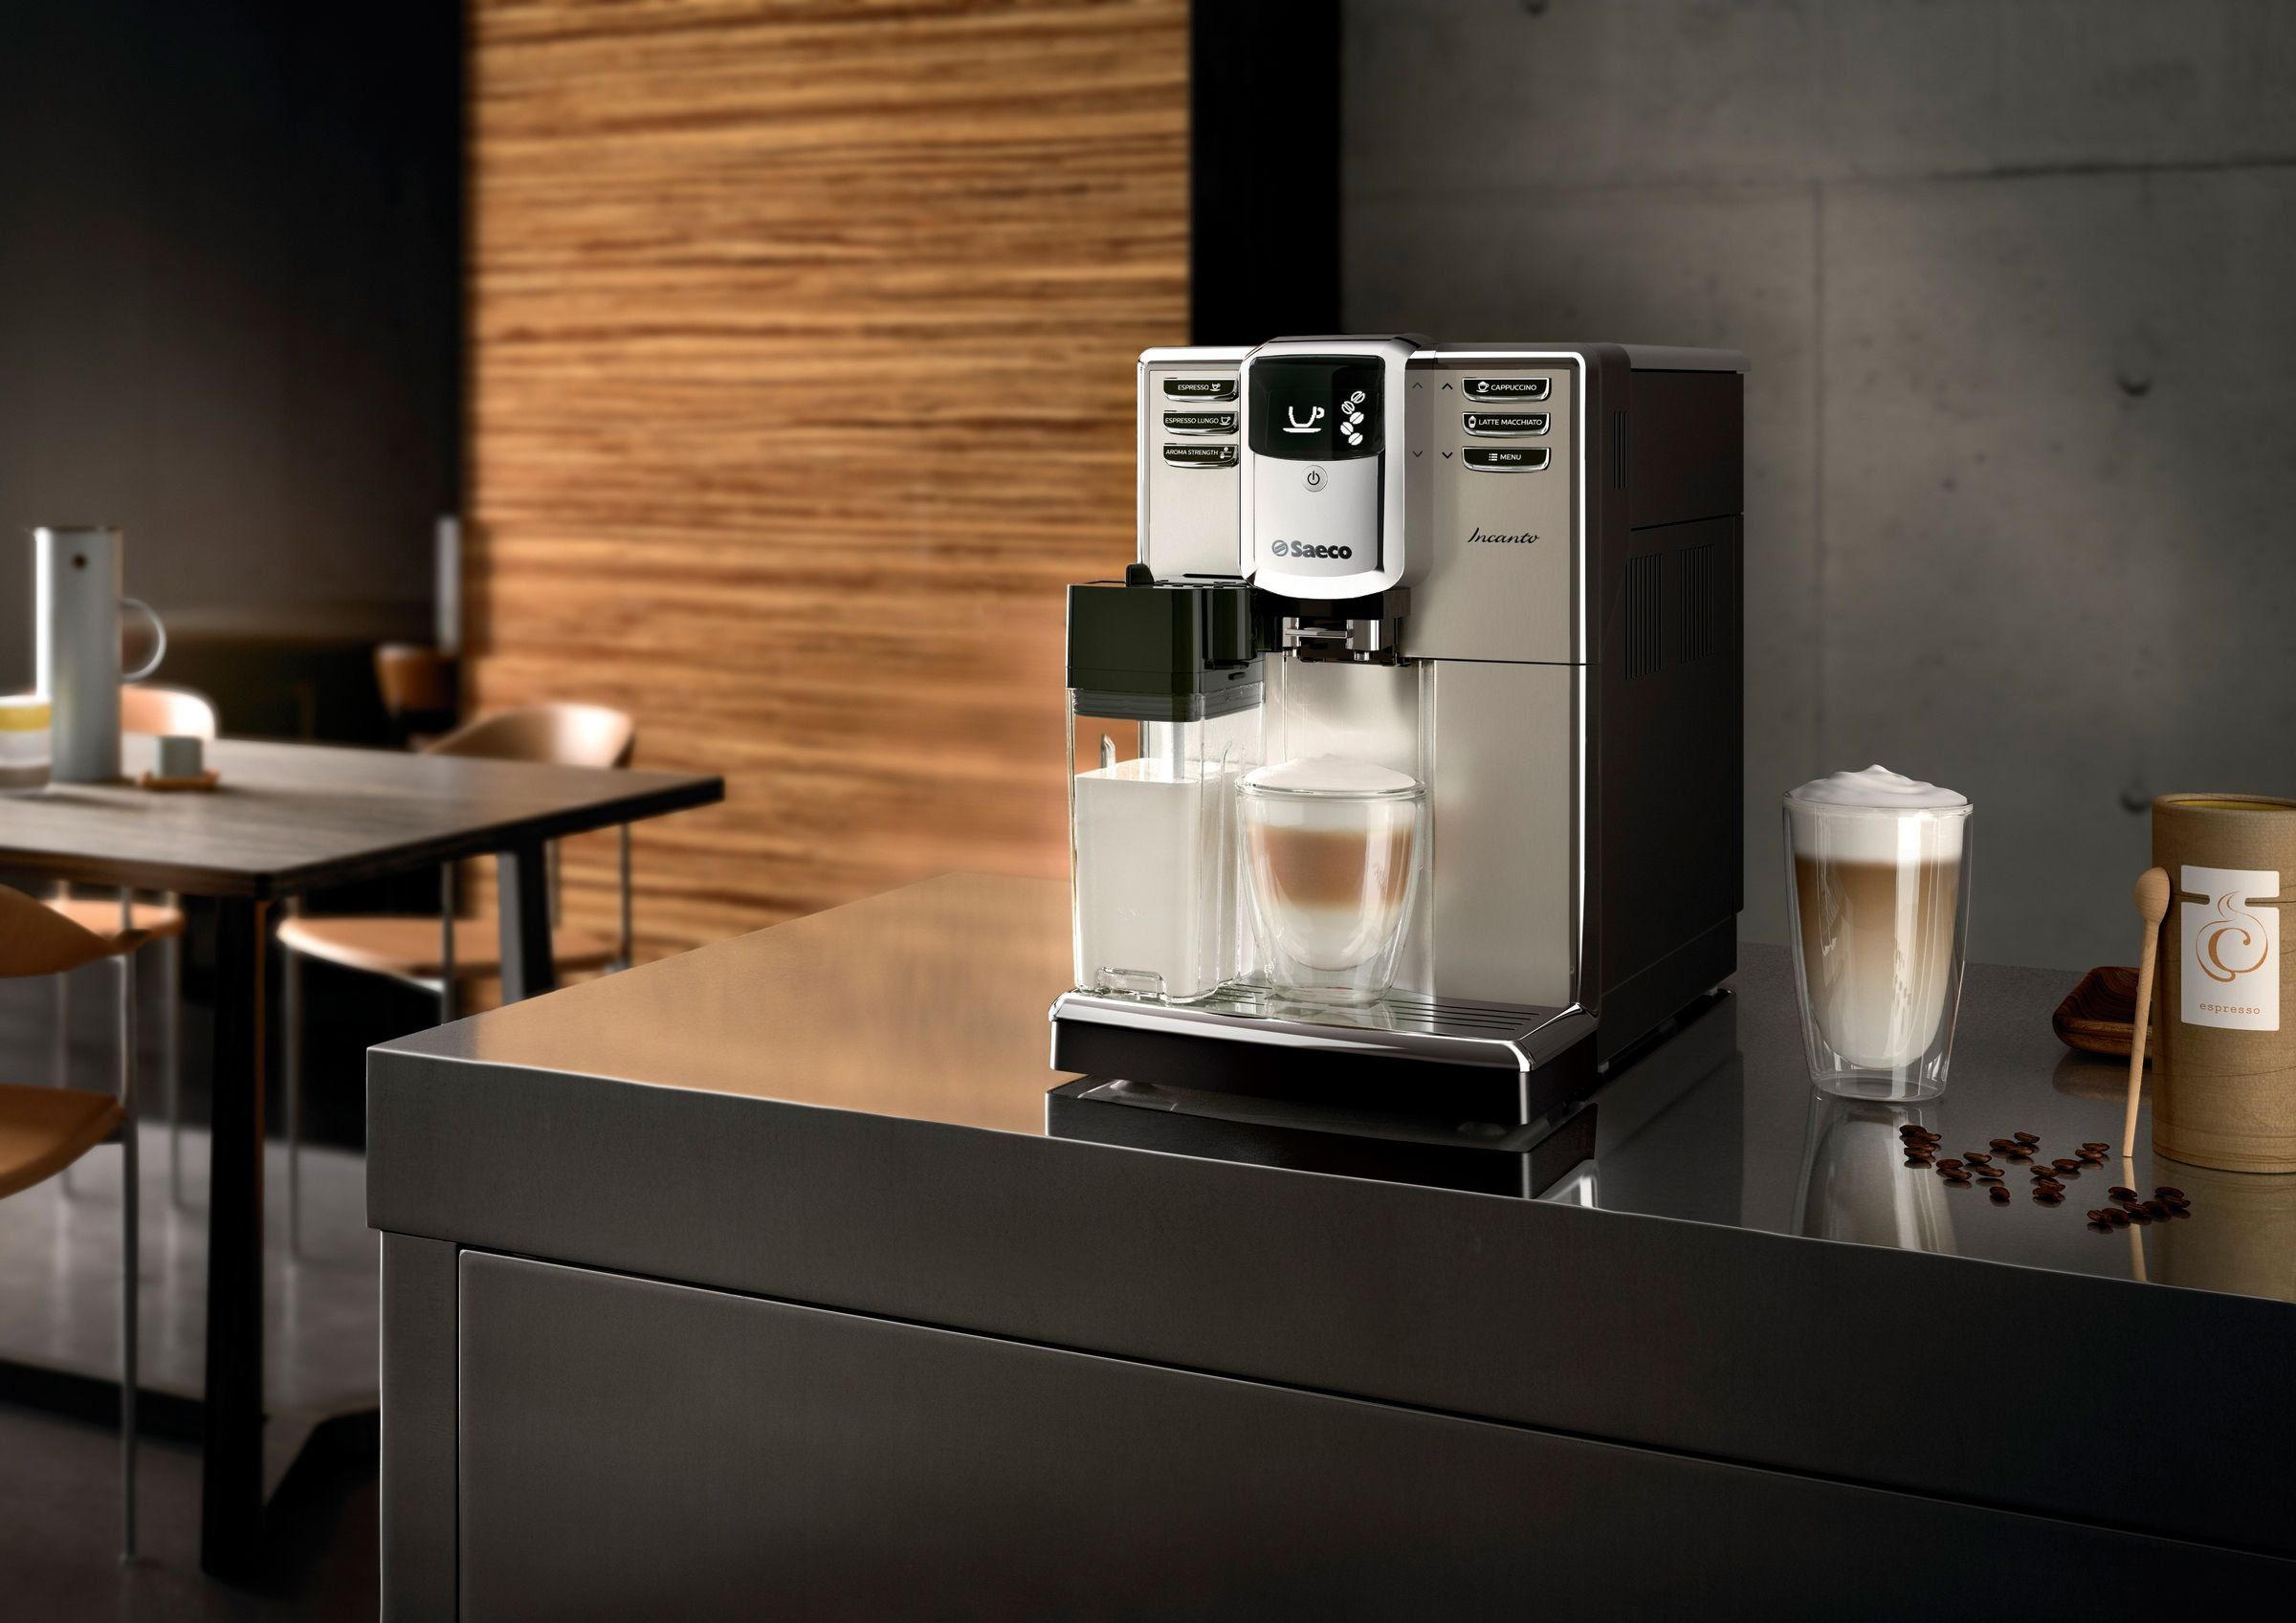 The best Saeco coffee machines for home and office in 2022